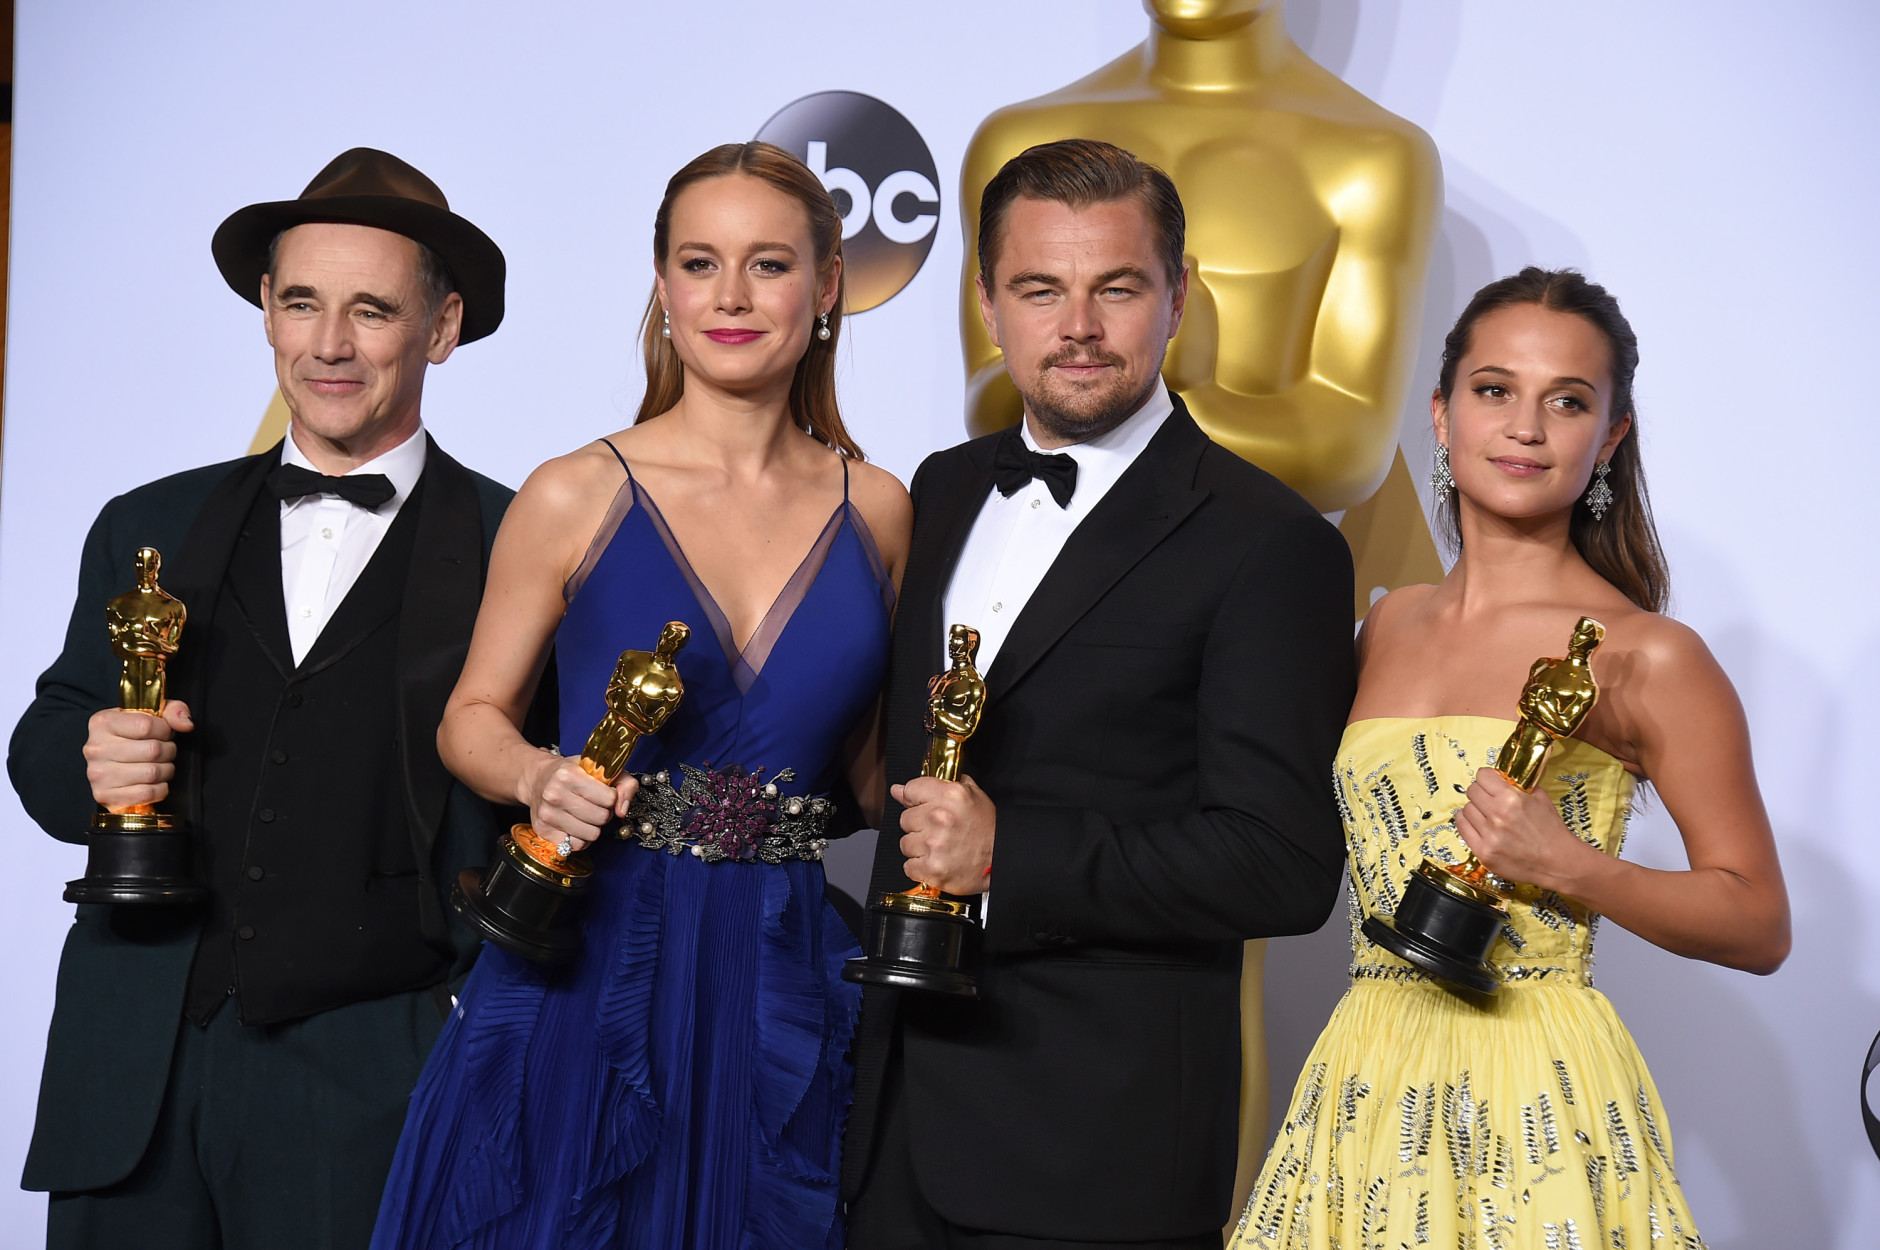 Mark Rylance, winner of the award for best actor in a supporting role for Bridge of Spies,"  from left, Brie Larson, winner of the award for best actress in a leading role for Room, Leonardo DiCaprio, winner of the award for best actor in a leading role for The Revenant, and Alicia Vikander, winner of the award for best actress in a supporting role for The Danish Girl pose in the press room at the Oscars on Sunday, Feb. 28, 2016, at the Dolby Theatre in Los Angeles. (Photo by Jordan Strauss/Invision/AP)